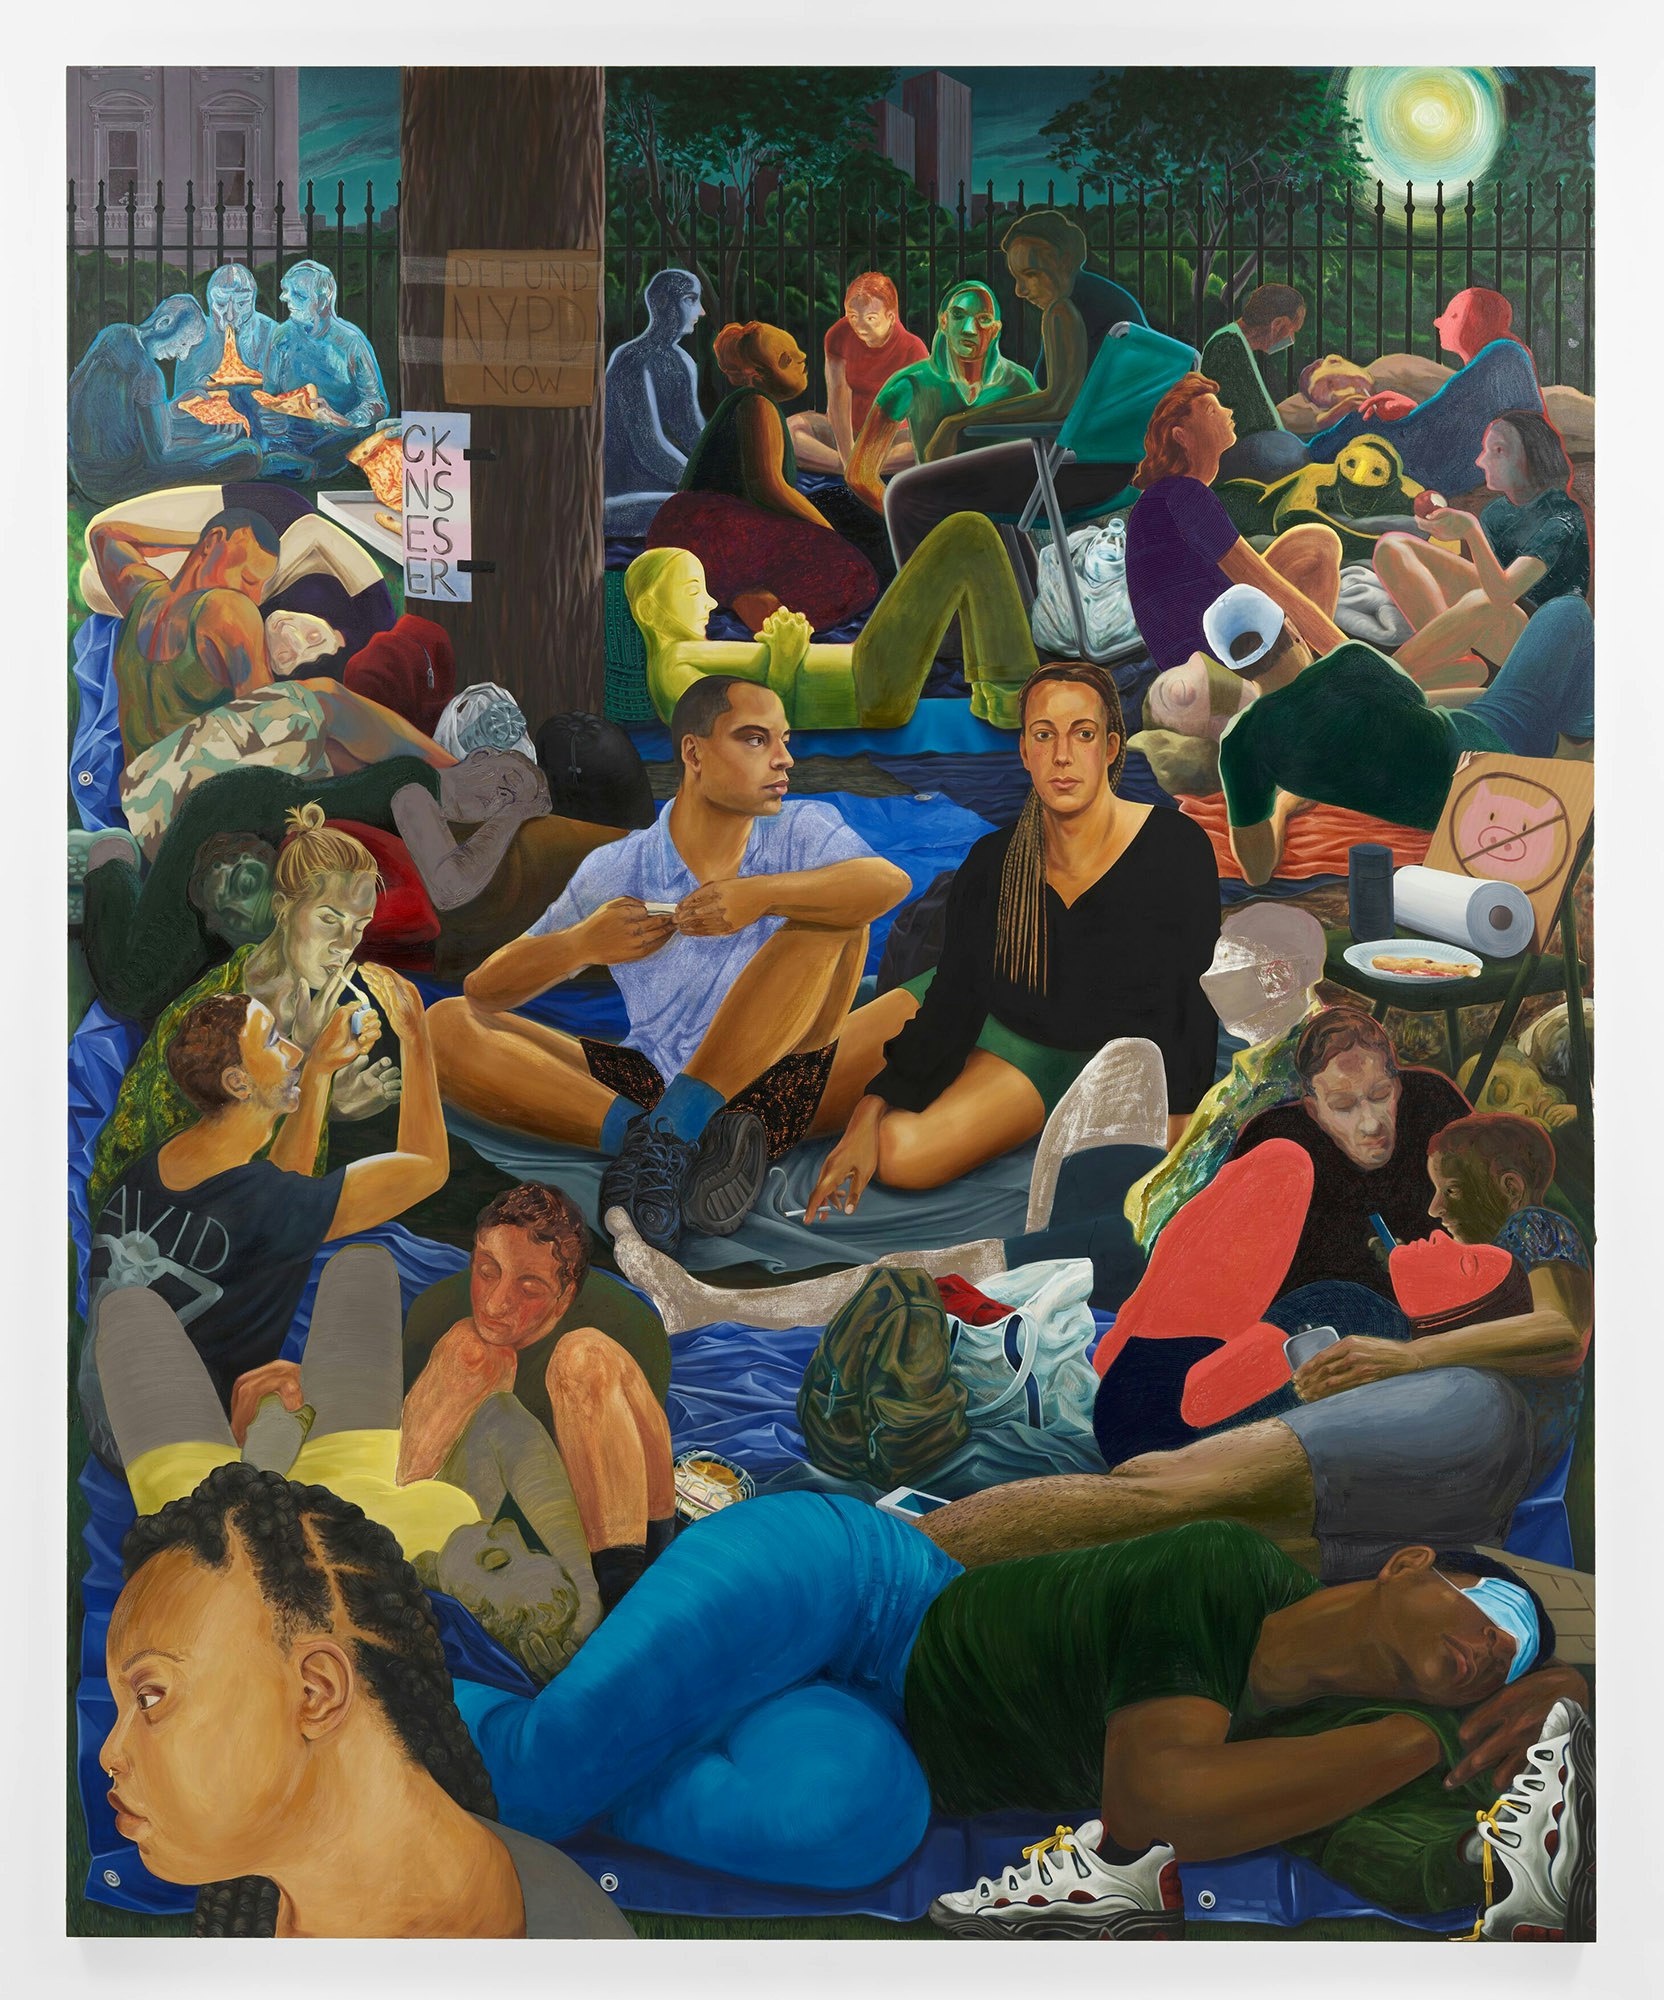 Nicole Eisenman, <em>The Abolitionists in the Park</em>, 2020-21. Oil on canvas, 127 x 105 inches. © Nicole Eisenman. Courtesy the artist and Hauser & Wirth. Photo: Thomas Barratt.